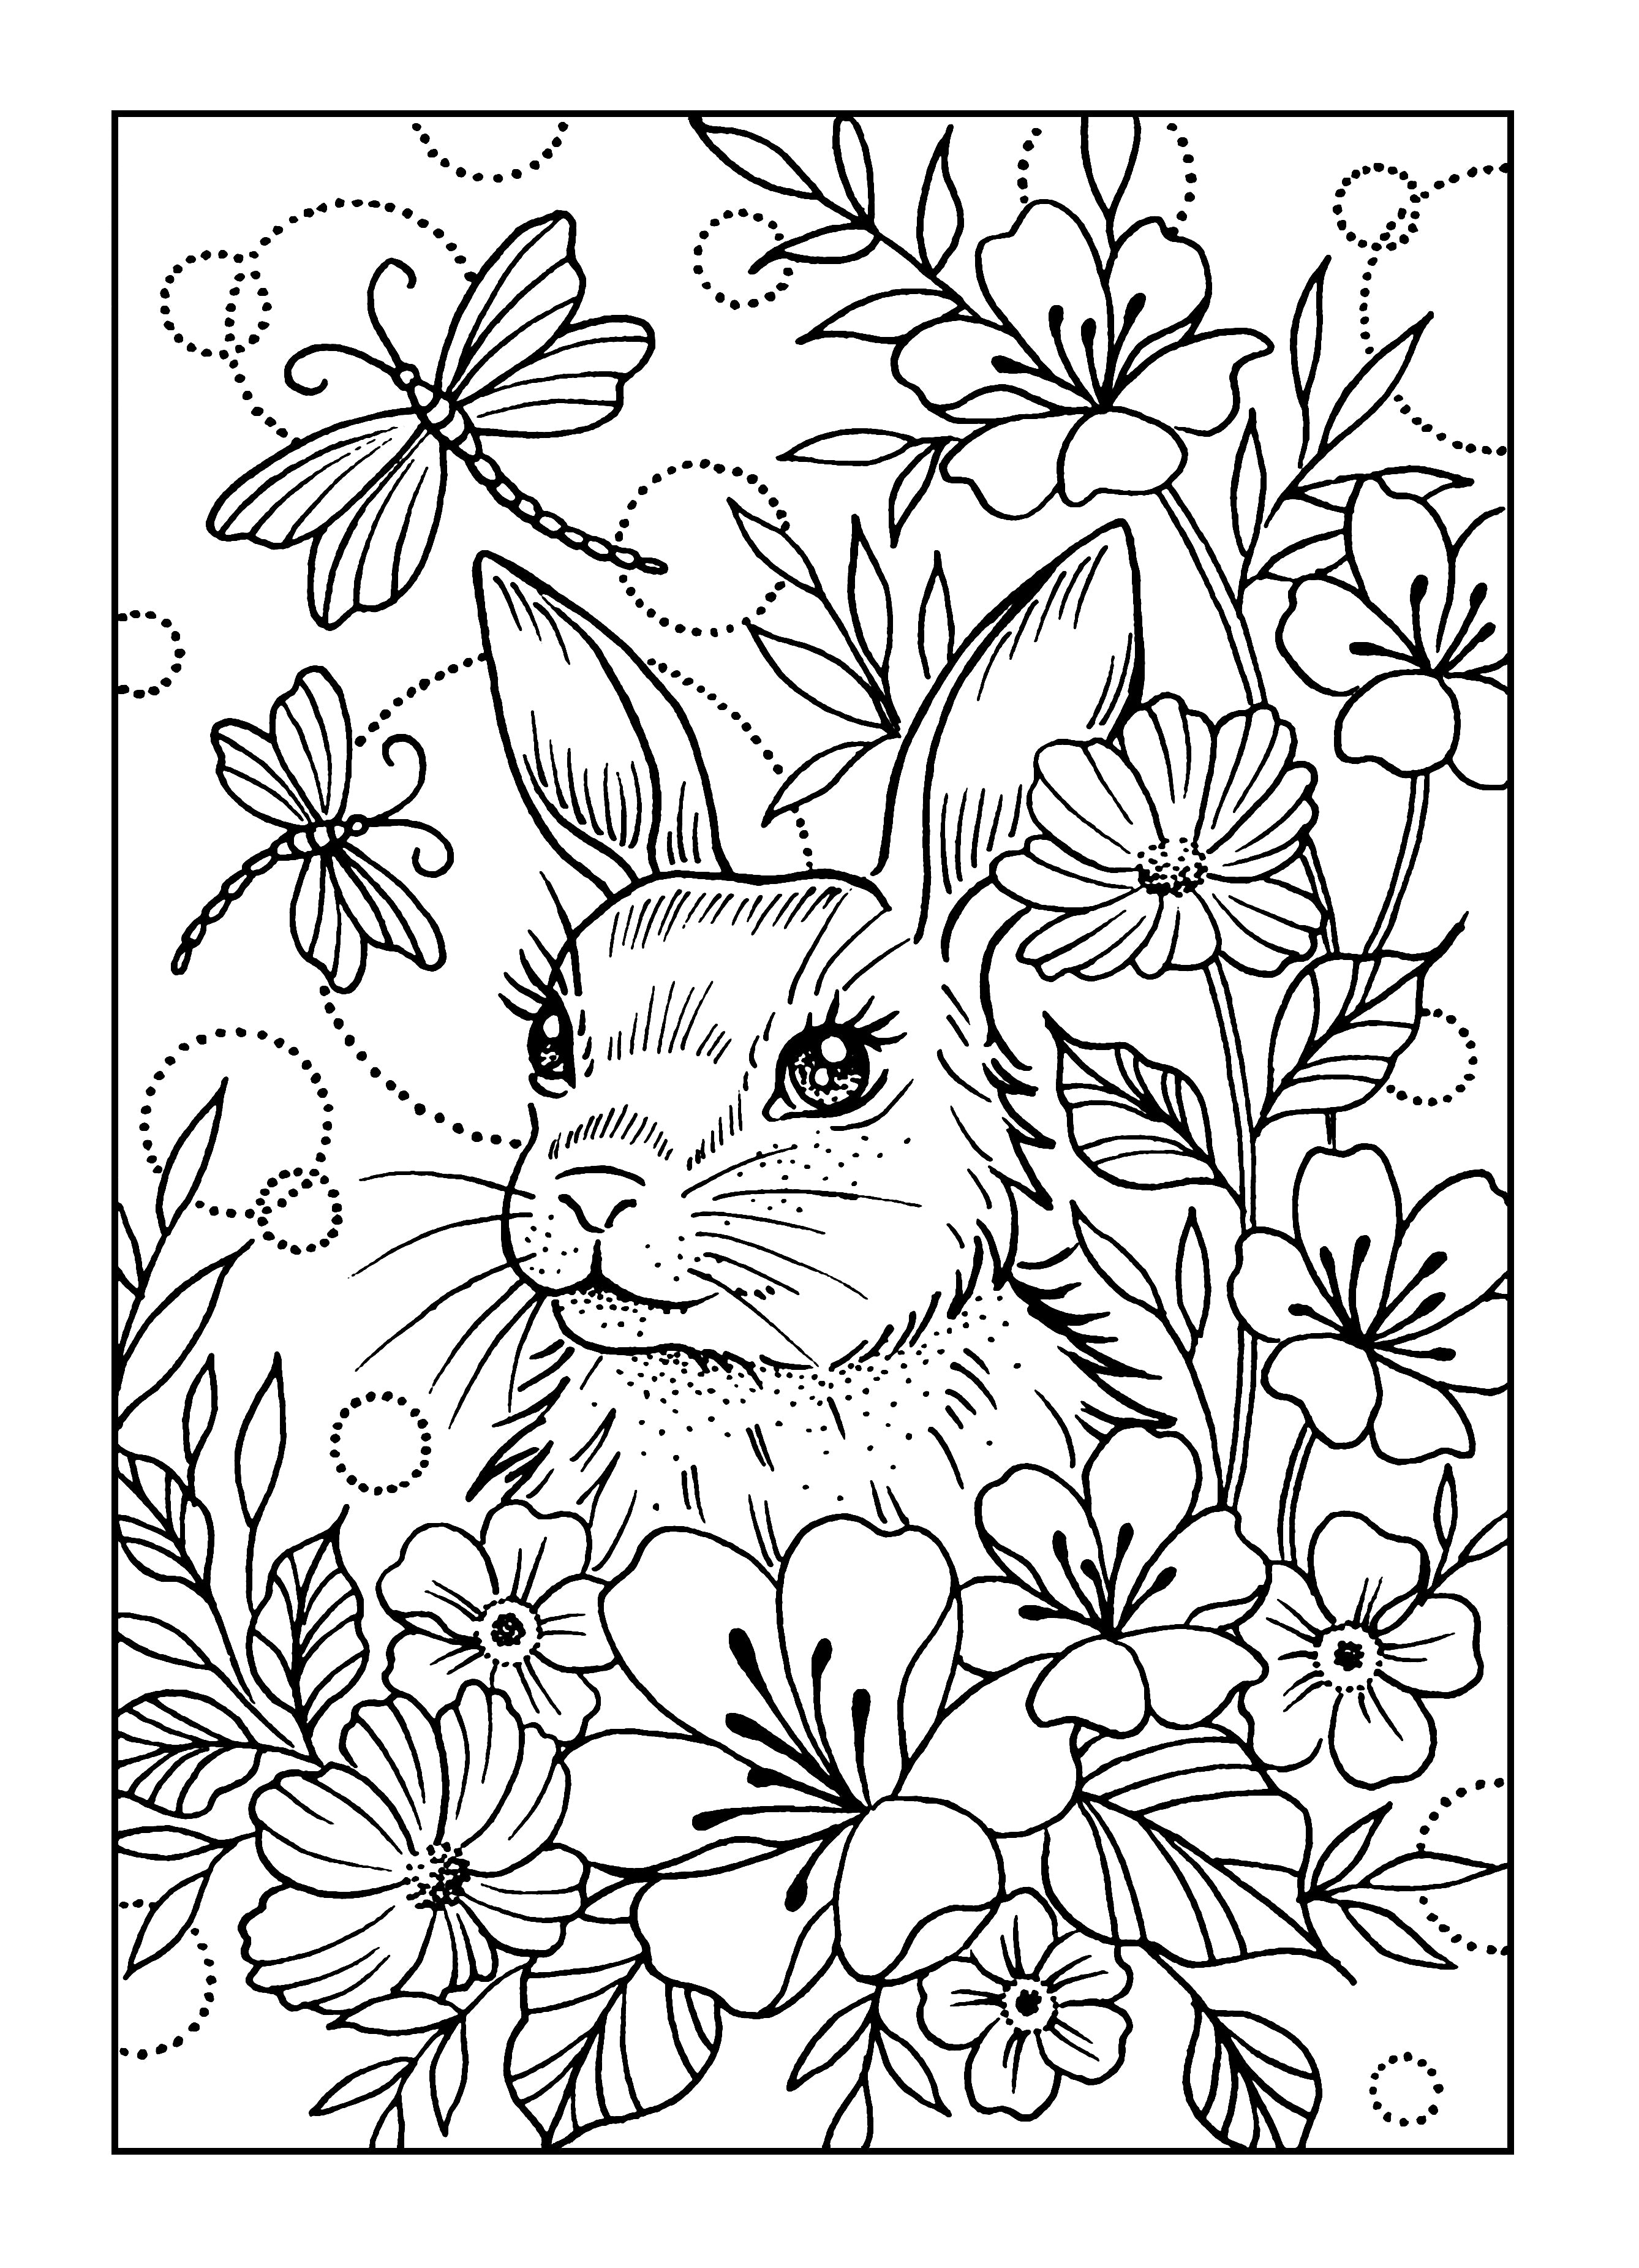 Creative Expressions Designer Boutique No Bunny But You 6 in x 4 in Clear Stamp Set